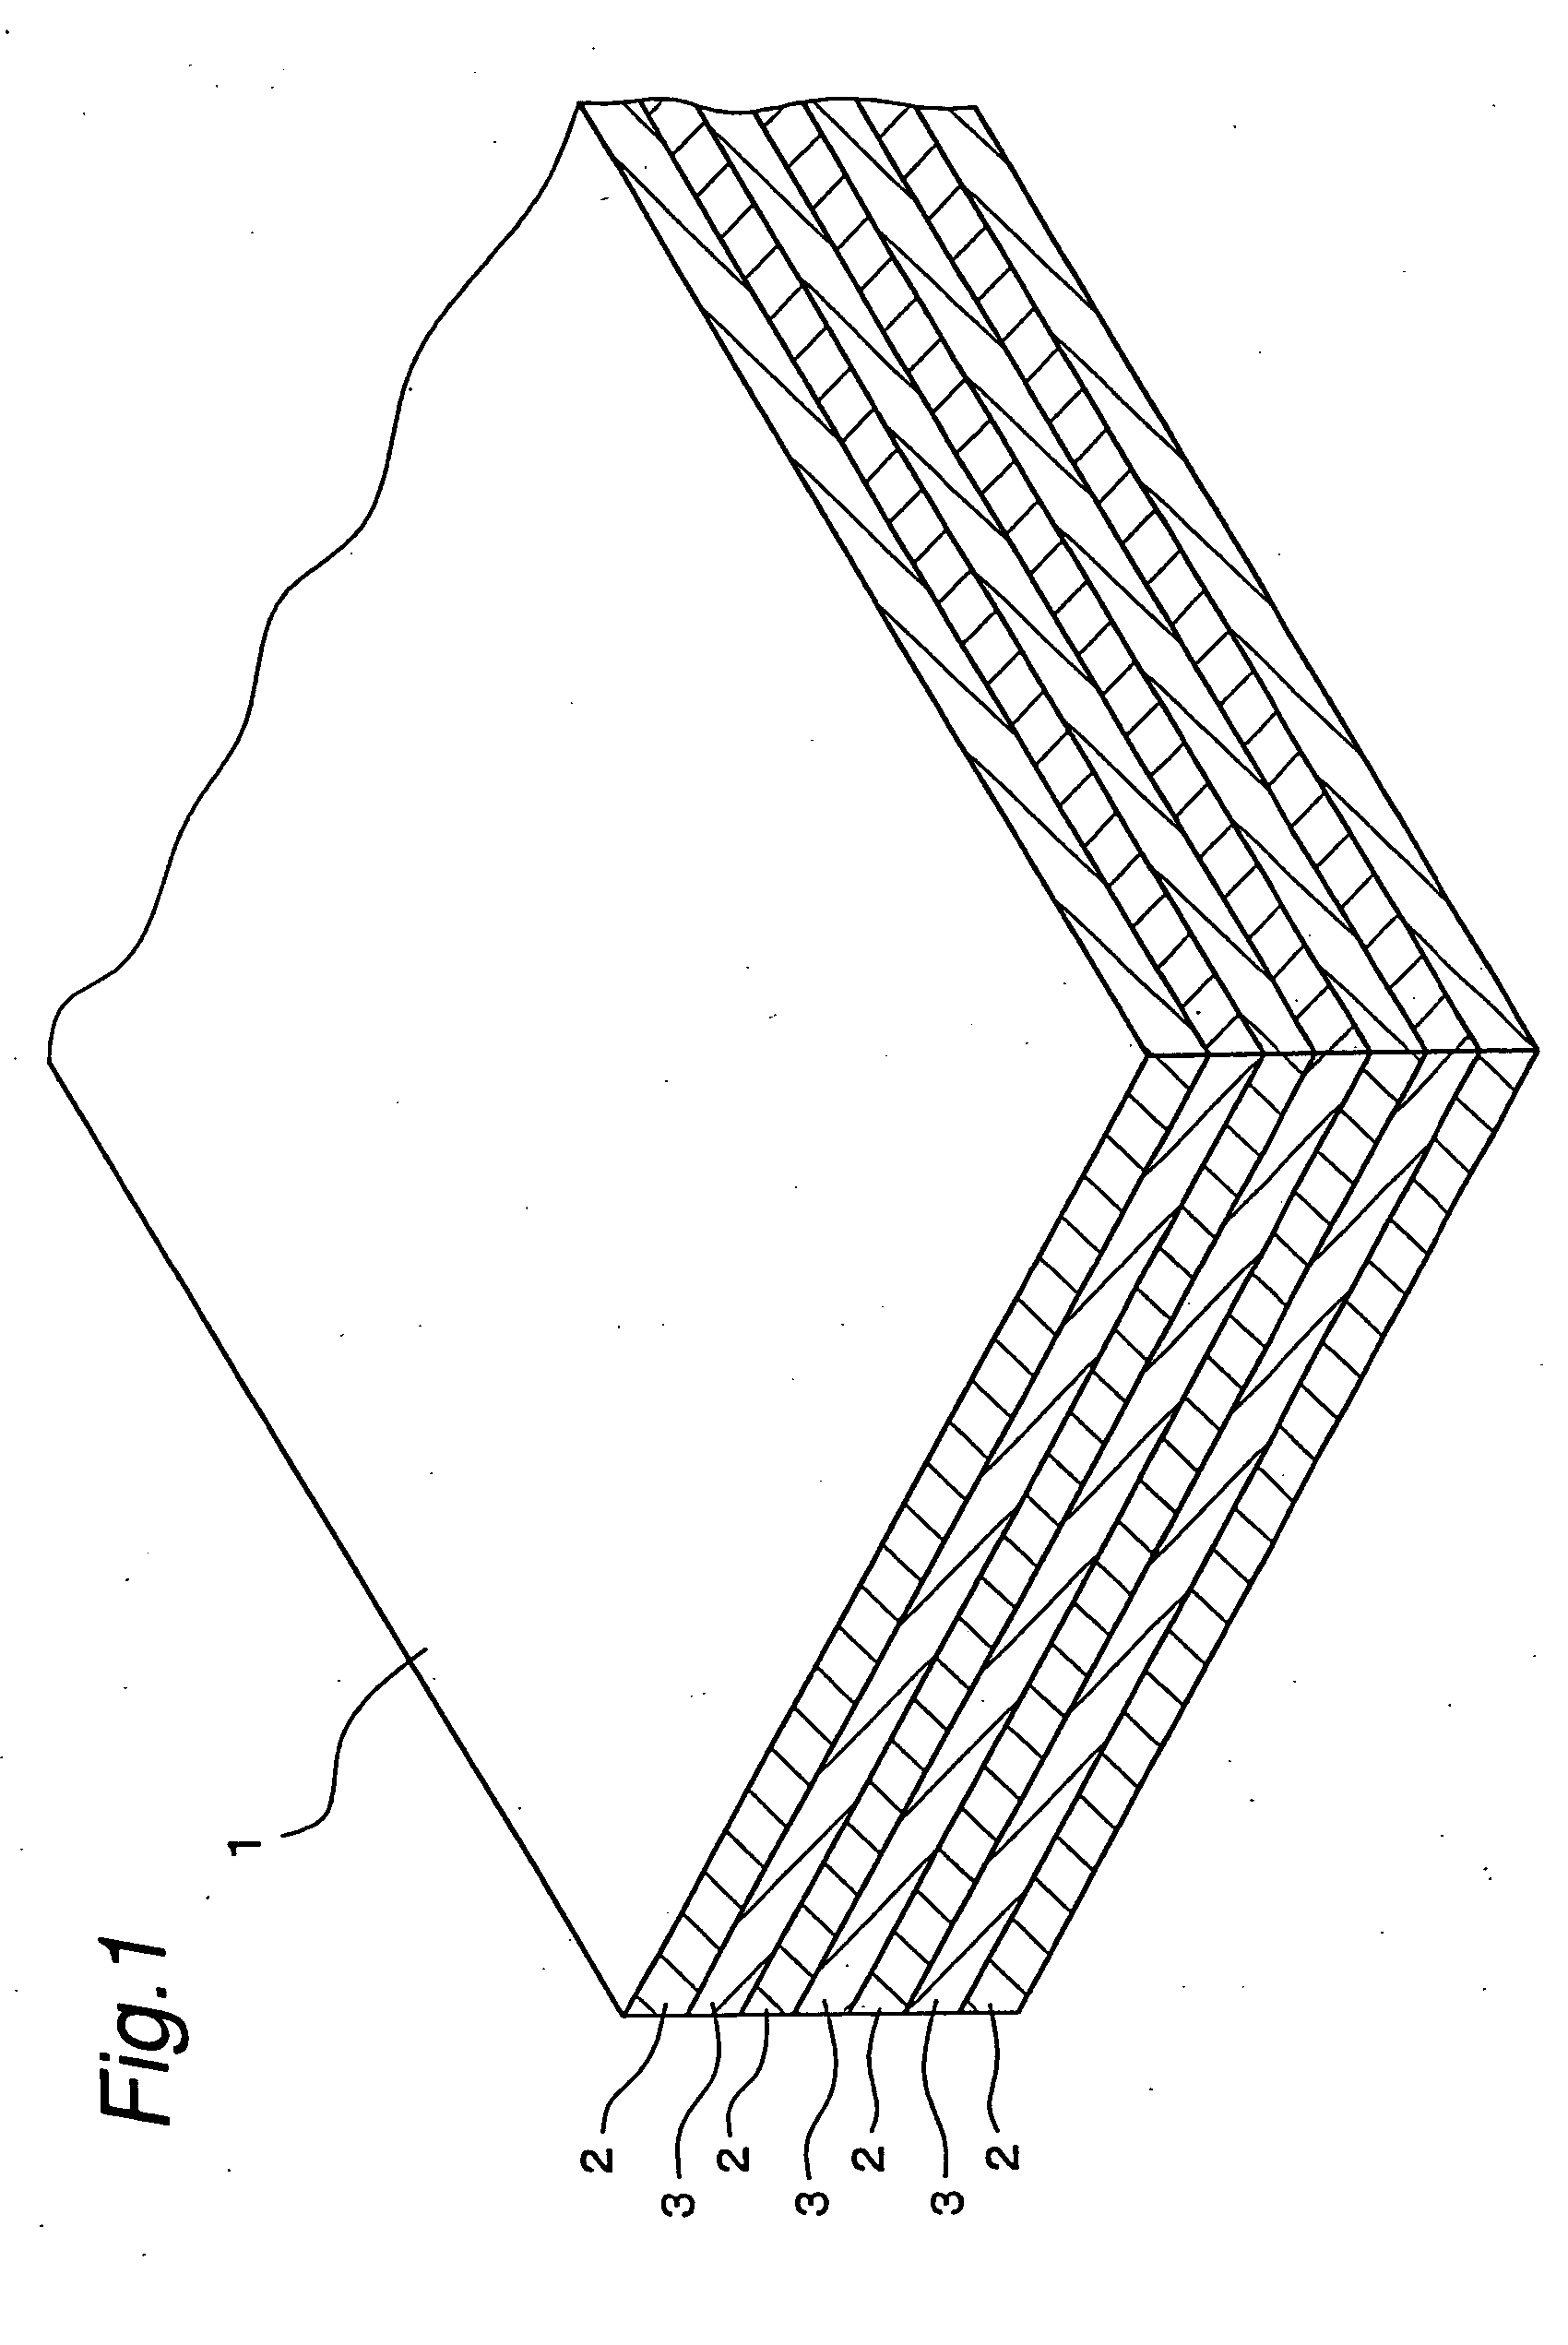 Laminated composite wooden material and method of manufacturing material